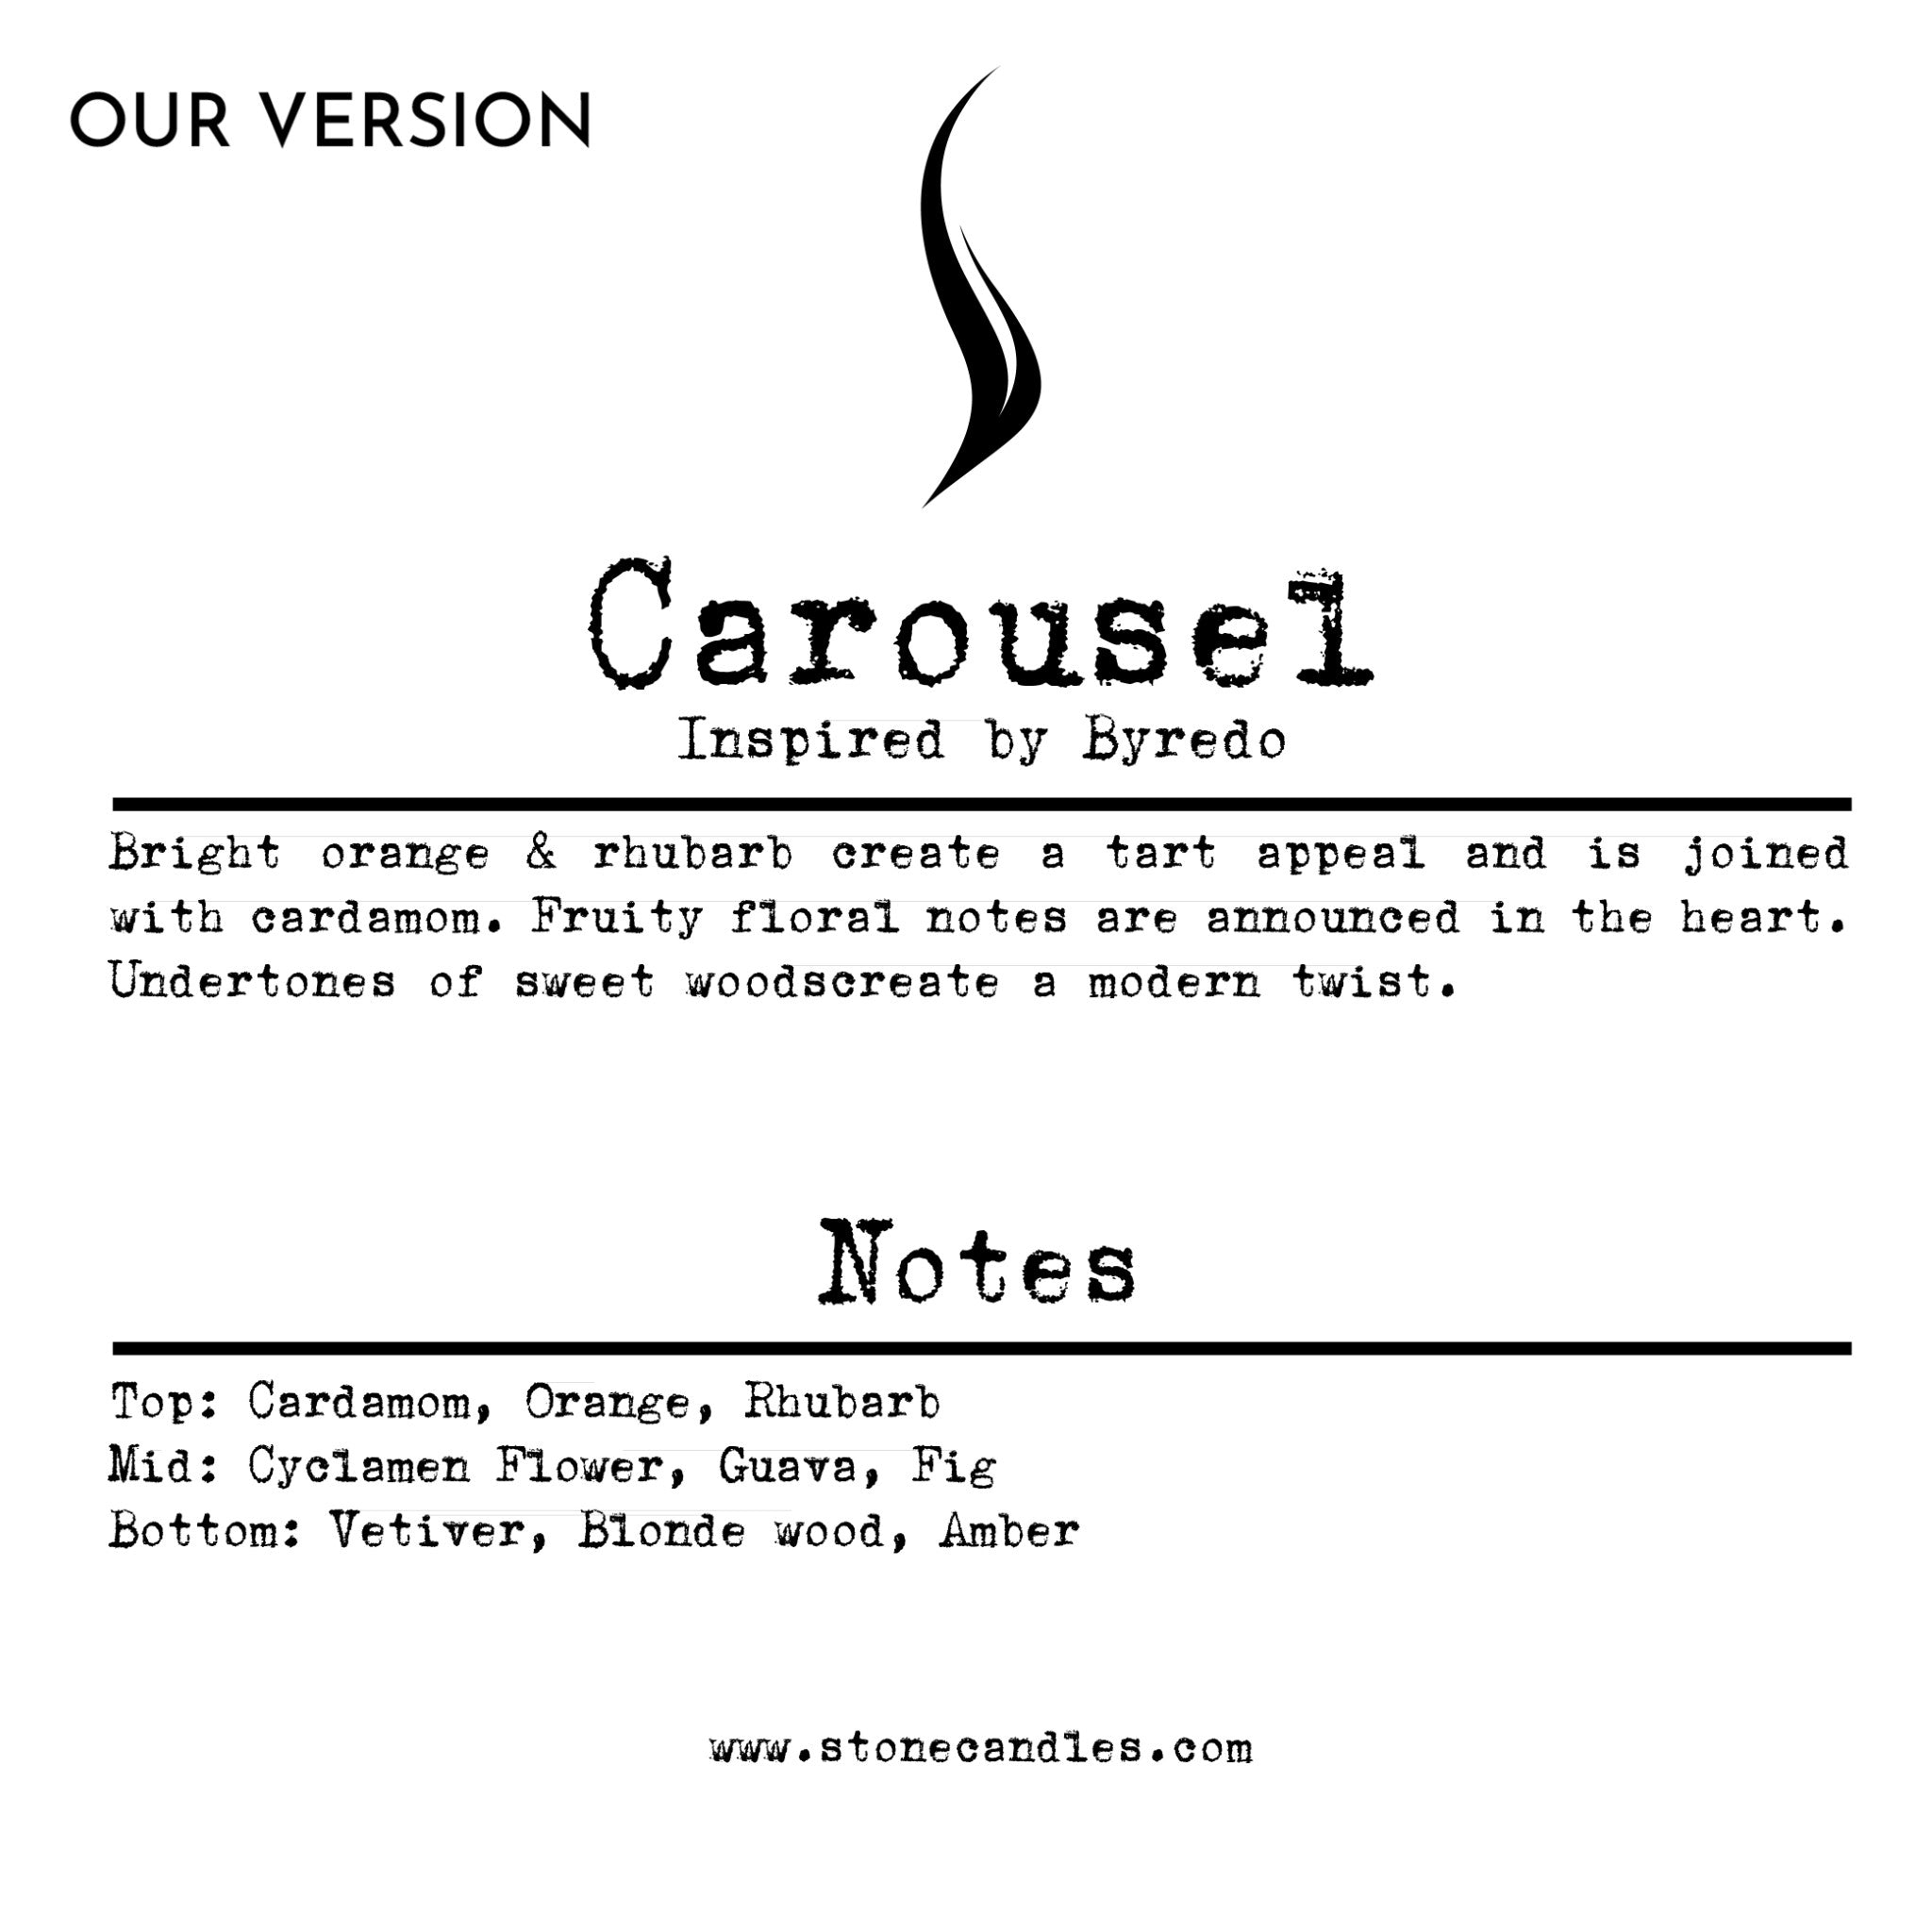 Carousel (our version) Sample Scent Strip